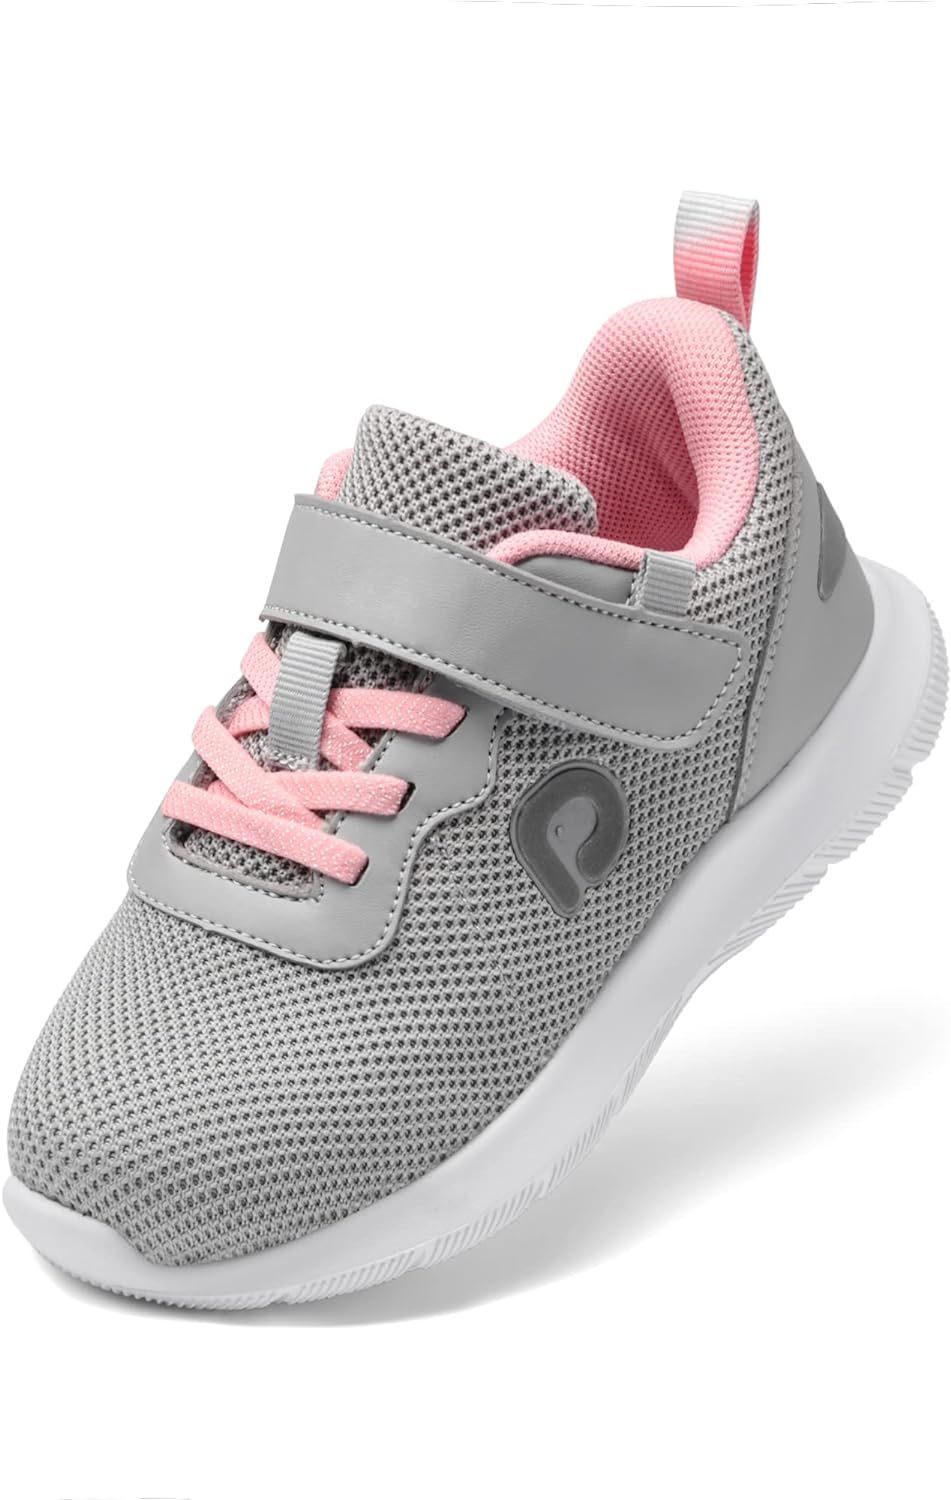 DREAM PAIRS Boys Girls Toddler Shoes Kids Athletic Tennis Running Sports Sneakers | Amazon (US)